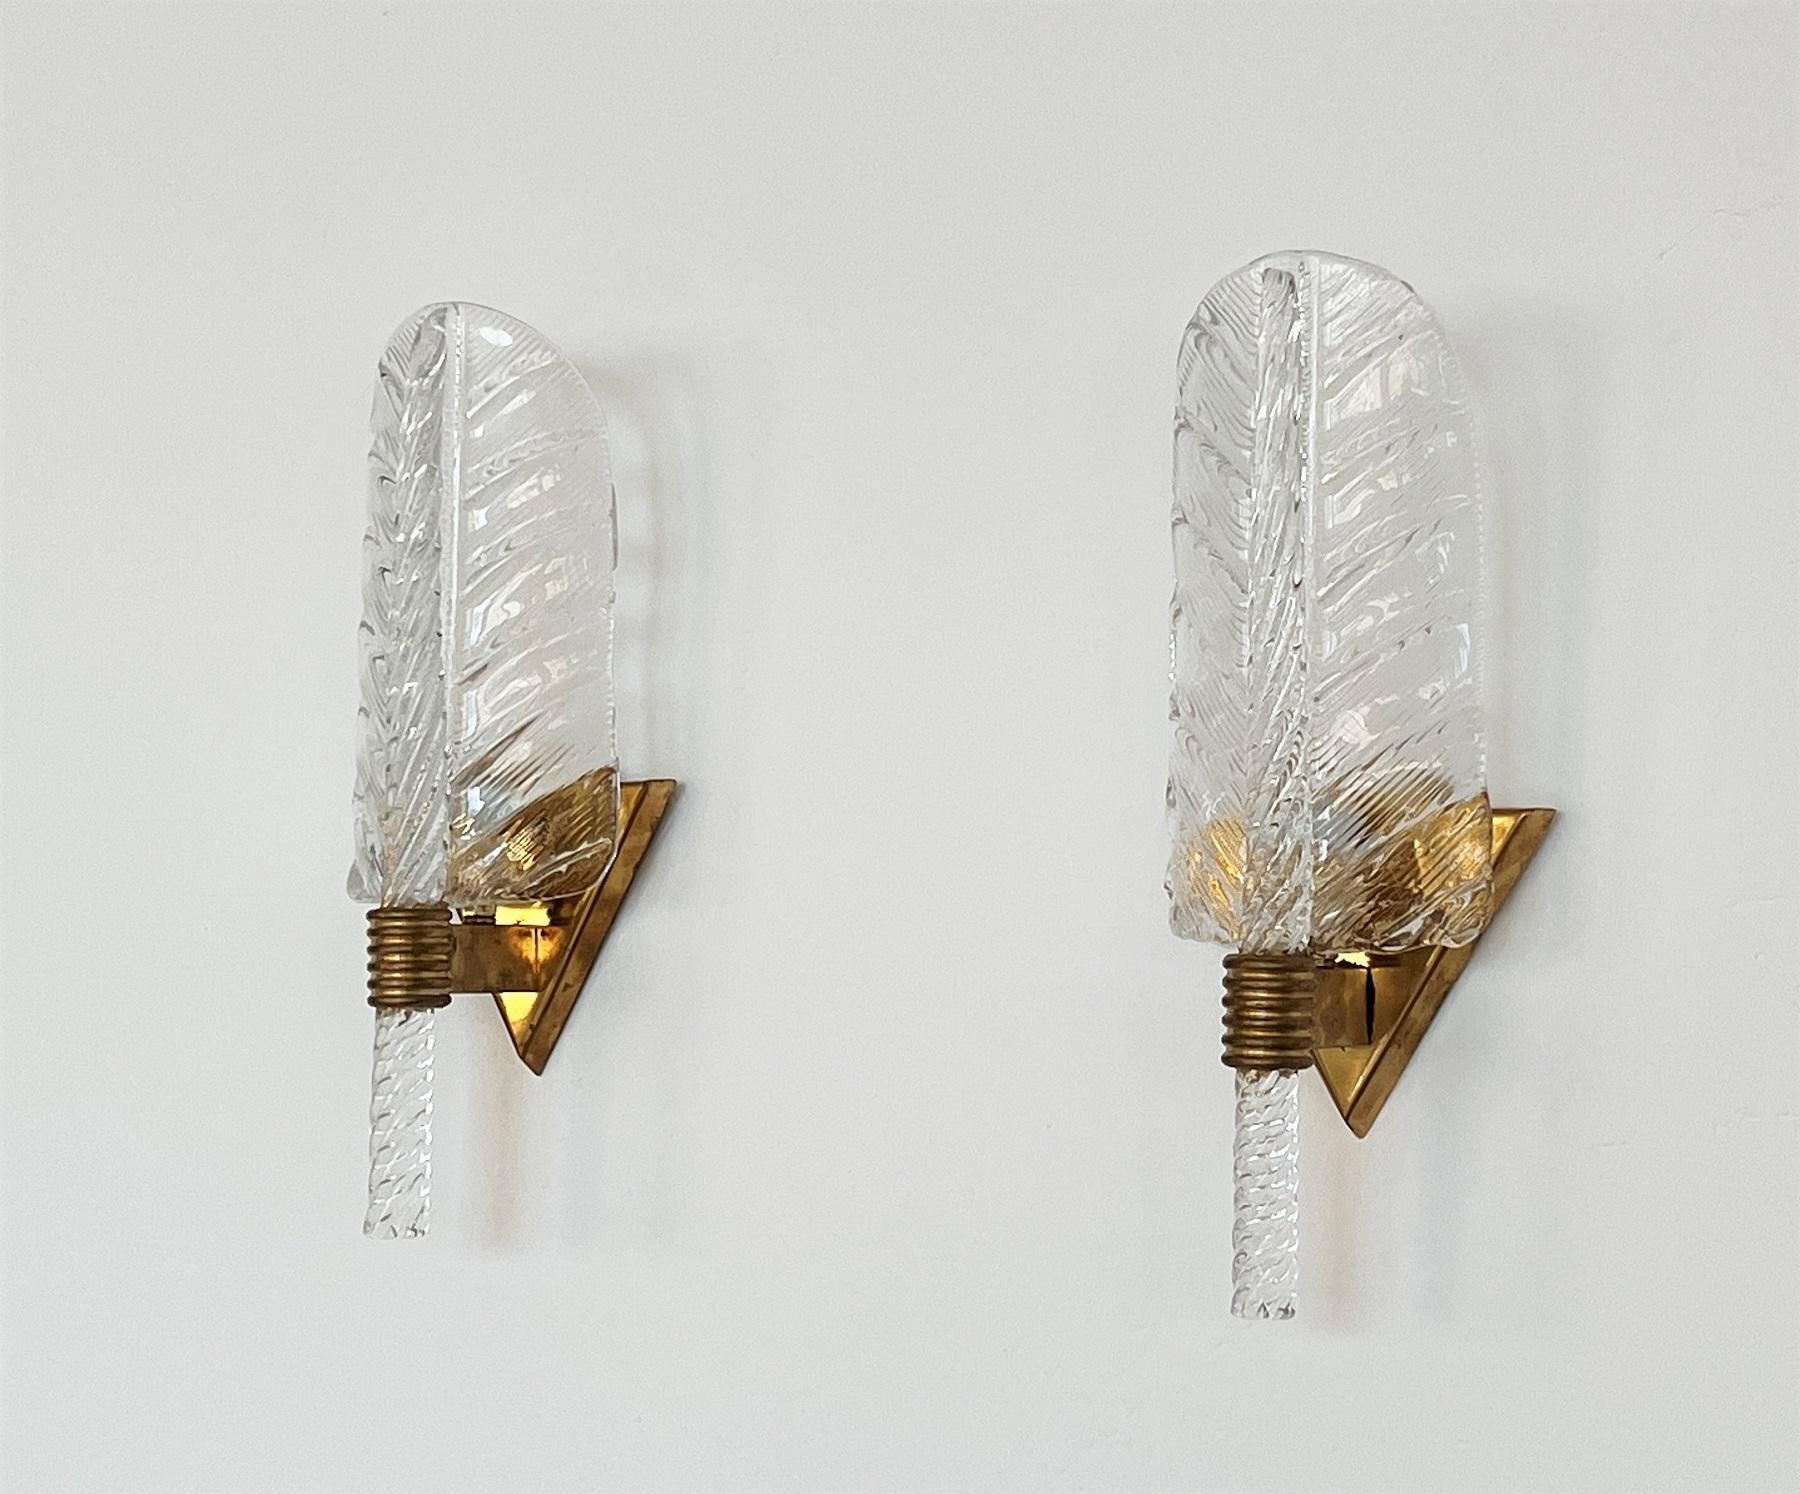 Art Deco Italian Brass and Murano Glass Leaves Wall Lights in Barovier Toso Style, 1990s For Sale